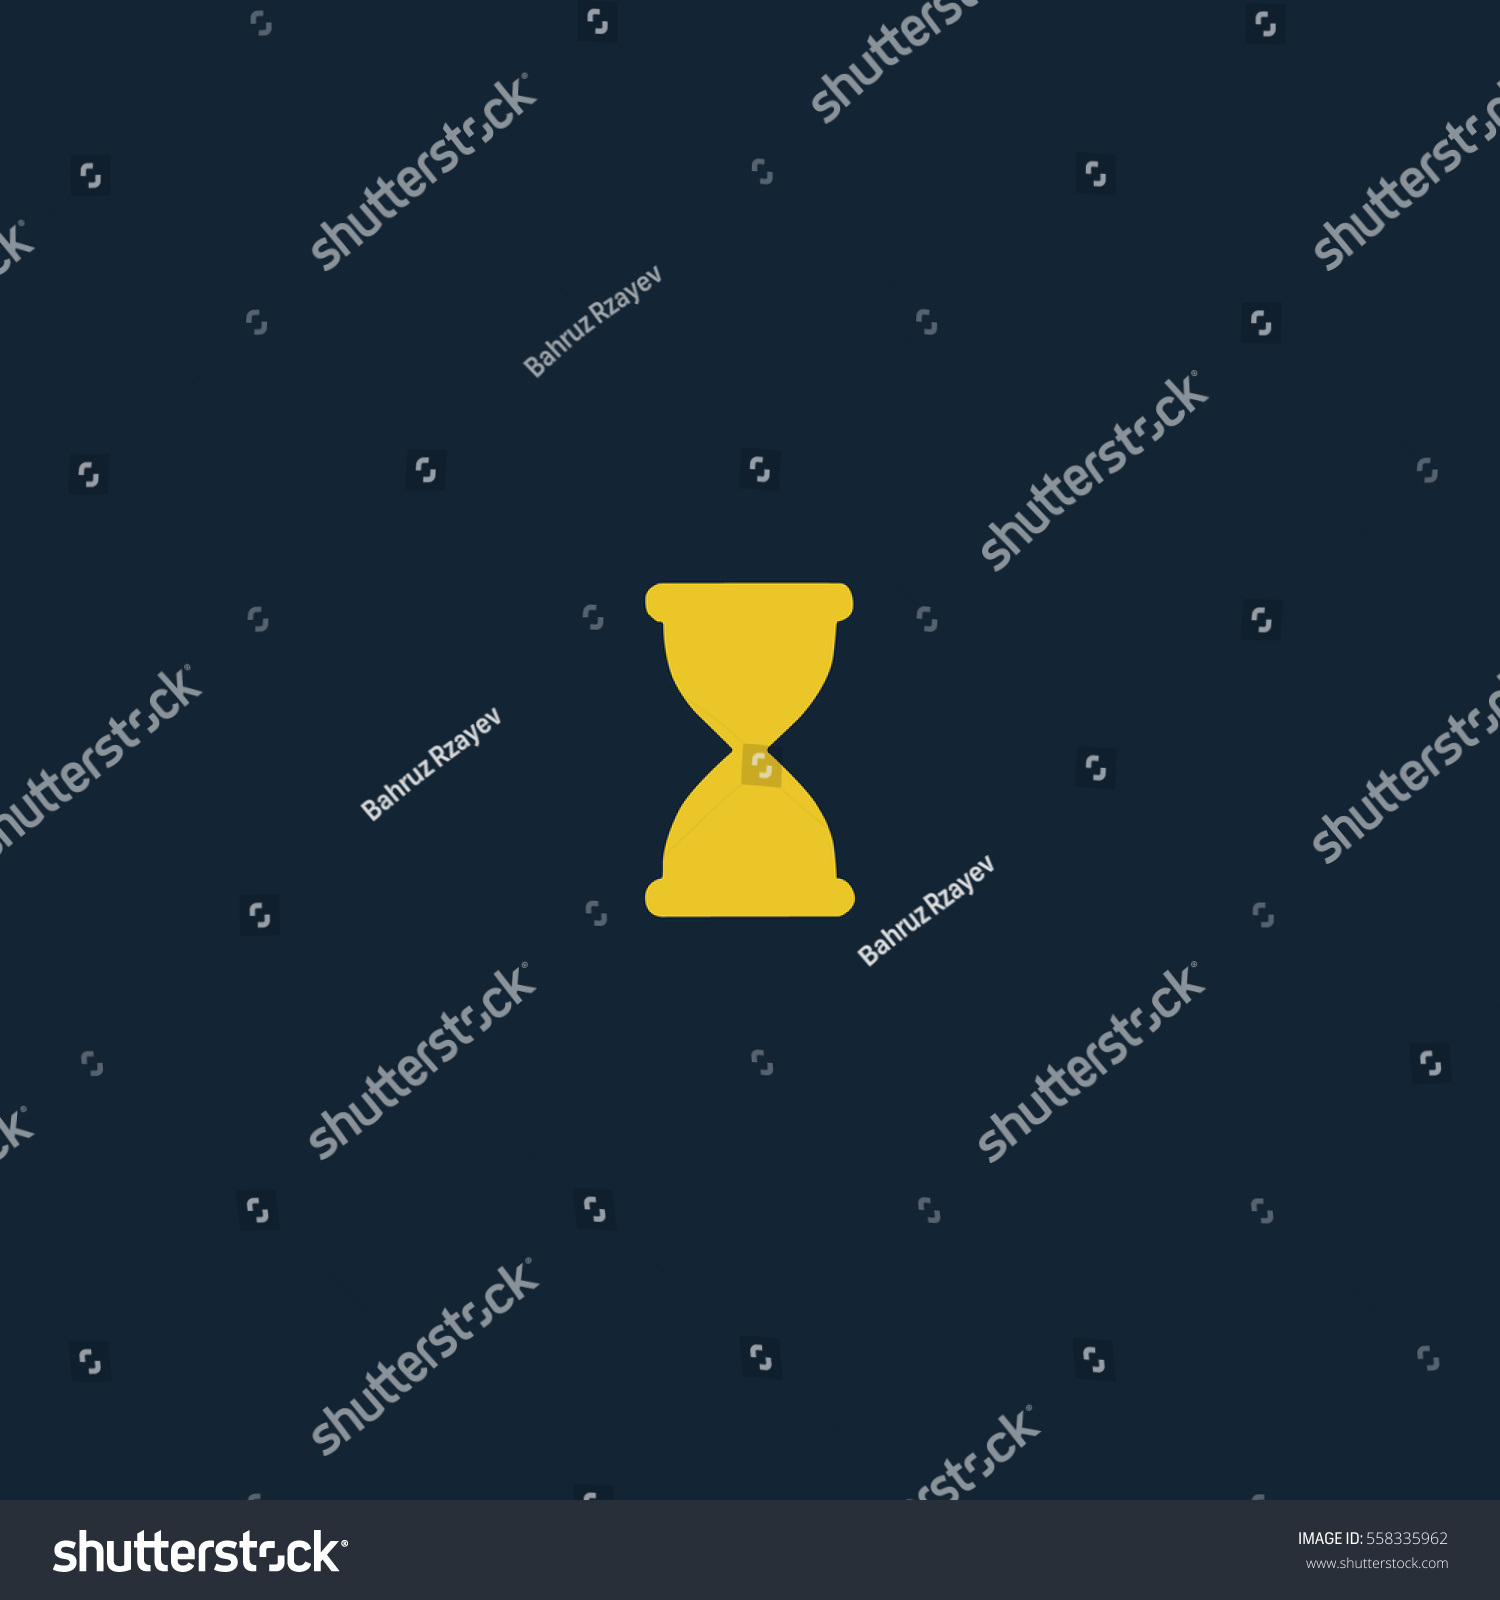 Hourglass Icon Silhouette Vector Illustration Stock Vector Royalty Free 558335962 Shutterstock 6828